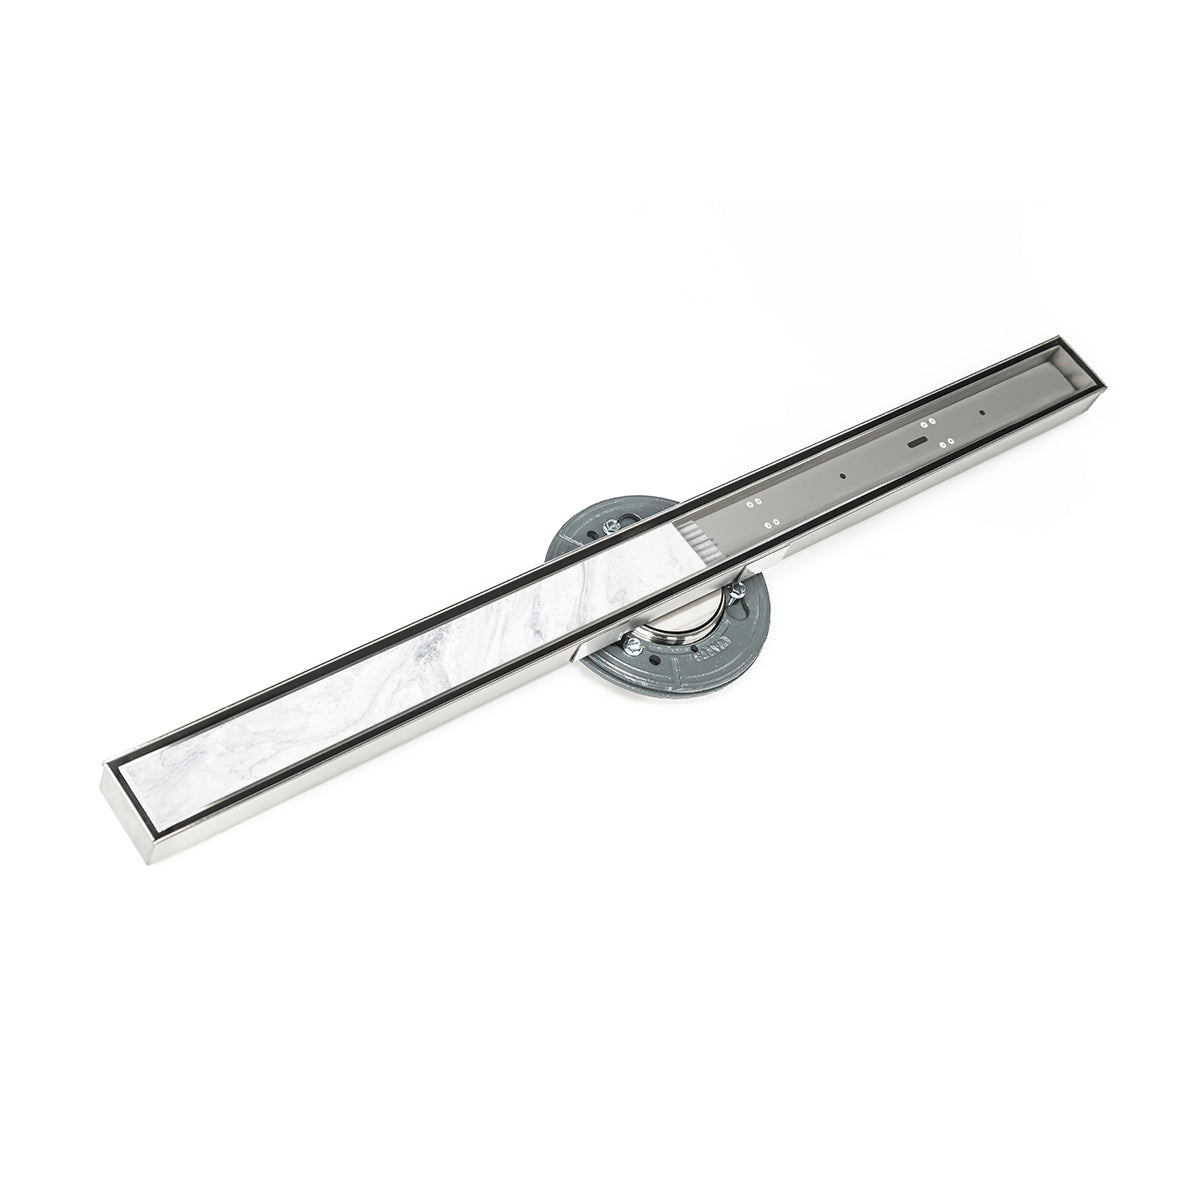 Infinity Drain 60" S-Stainless Steel Series High Flow Site Sizable Linear Drain Kit with Tile Insert Frame with PVC Drain Body, 3" Outlet